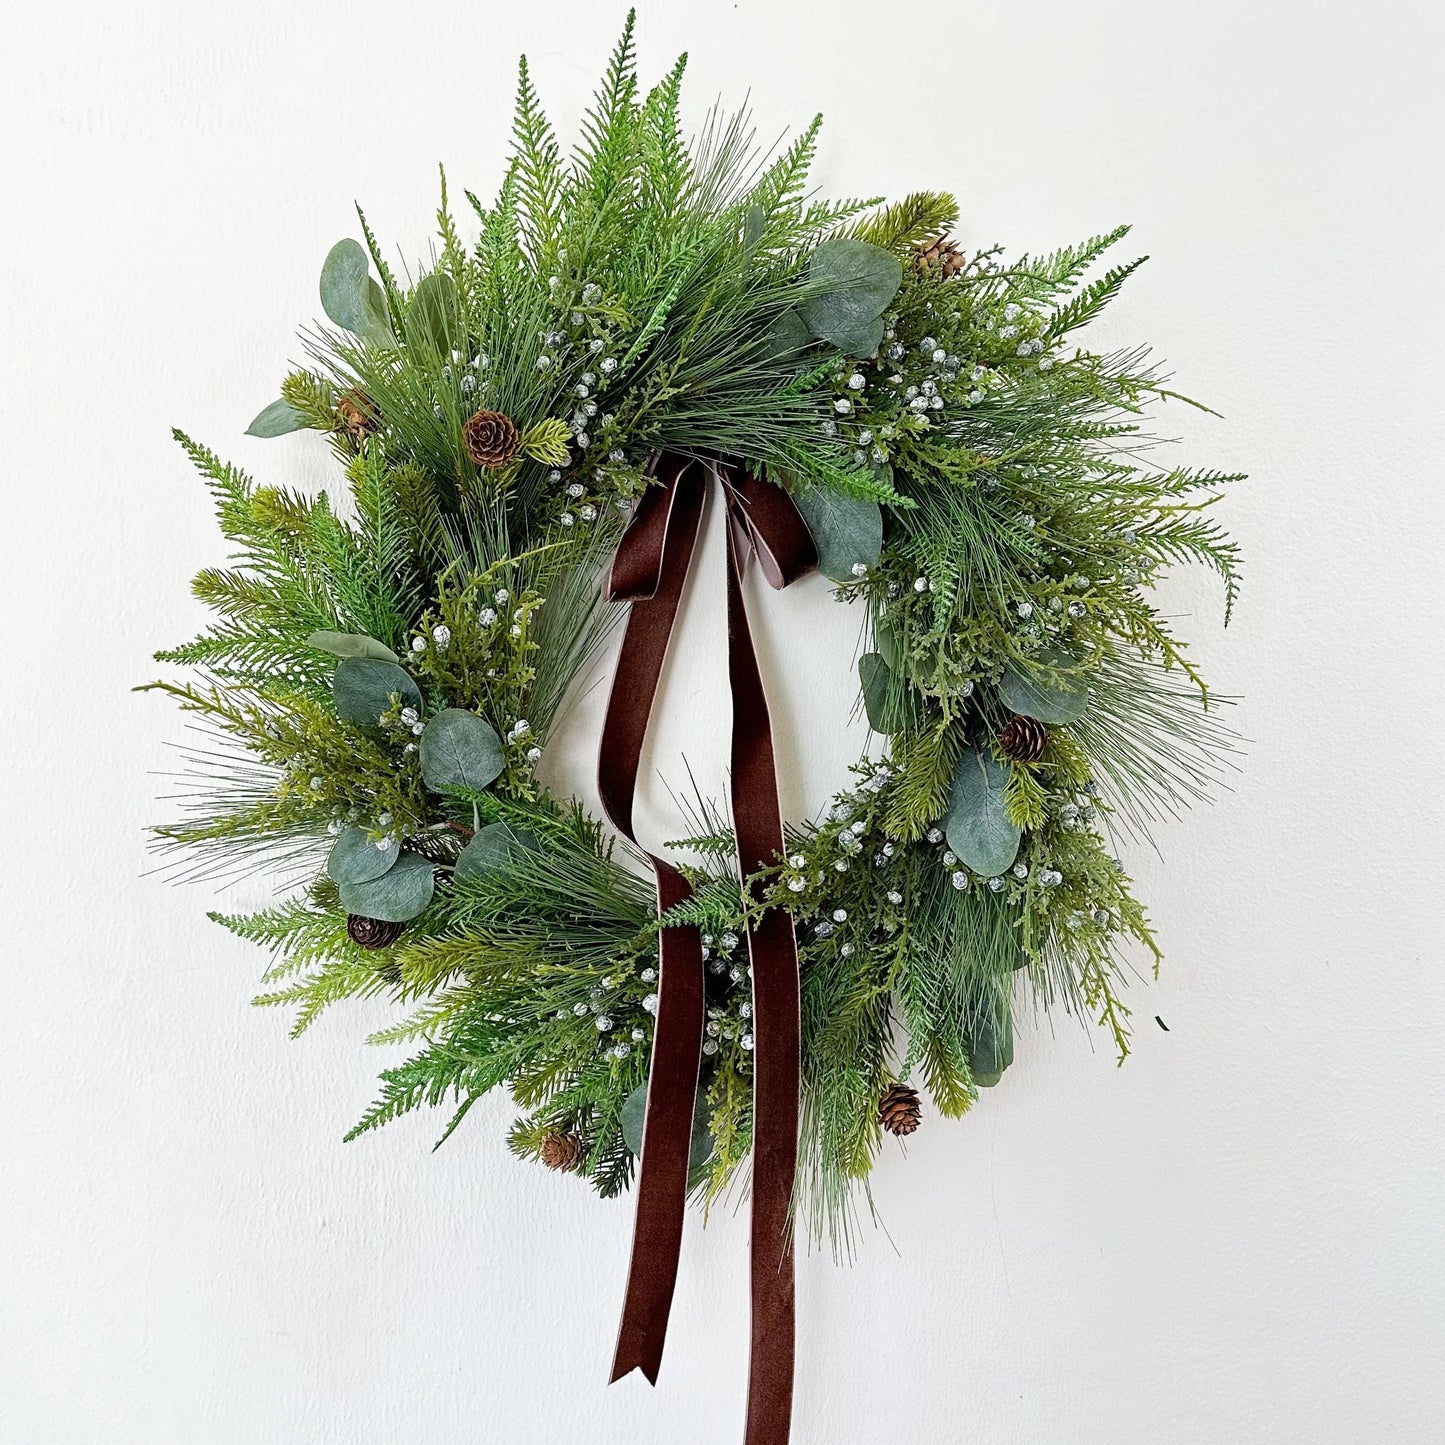 Classic Christmas Wreath w Brown Velvet Ribbon, Winter Evergreen Wreath w/ Pine and Cedar for Front Door, Traditional Seasonal Home Decor